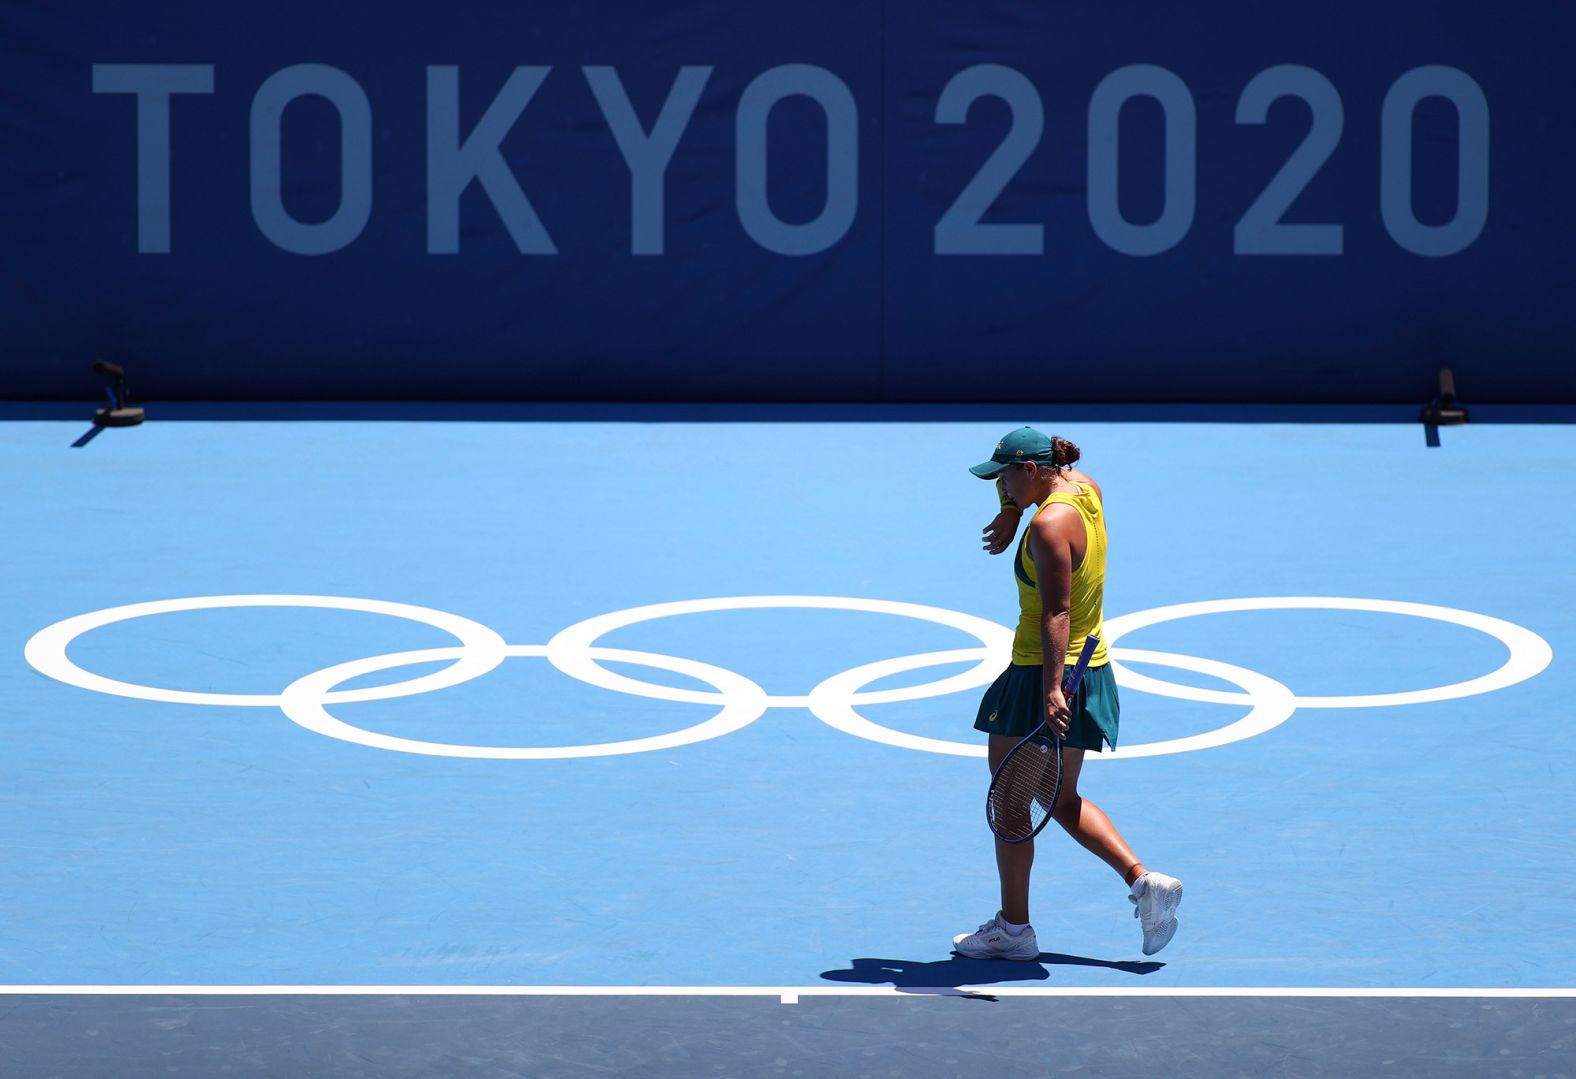 Australian tennis star Ashleigh Barty, the world's top-ranked player who won Wimbledon earlier this month, reacts during her <a href="index.php?page=&url=https%3A%2F%2Fwww.cnn.com%2Fworld%2Flive-news%2Ftokyo-2020-olympics-07-25-21-spt%2Fh_875b23b20b49f797a713d5a76988e298" target="_blank">first-round loss </a>to Spain's Sara Sorribes Tormo on July 25. Sorribes Tormo won 6-4, 6-3.